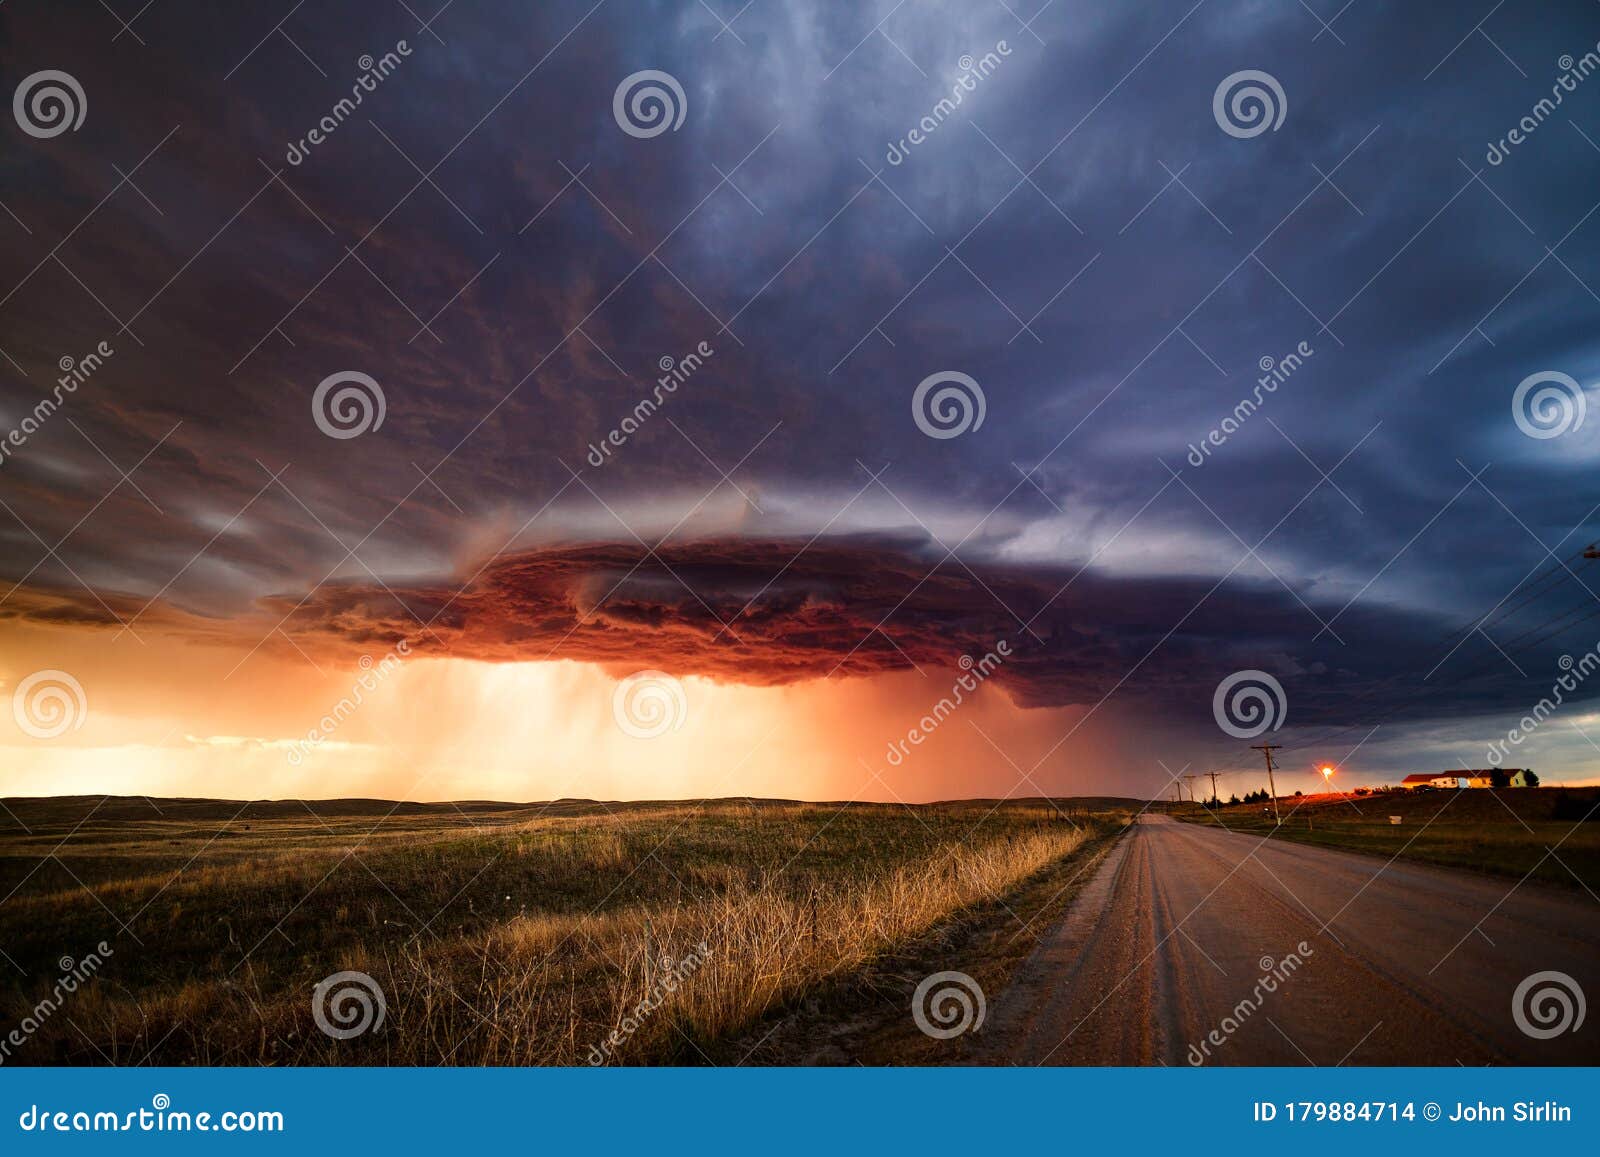 dramatic sky with ominous storm clouds at sunset.